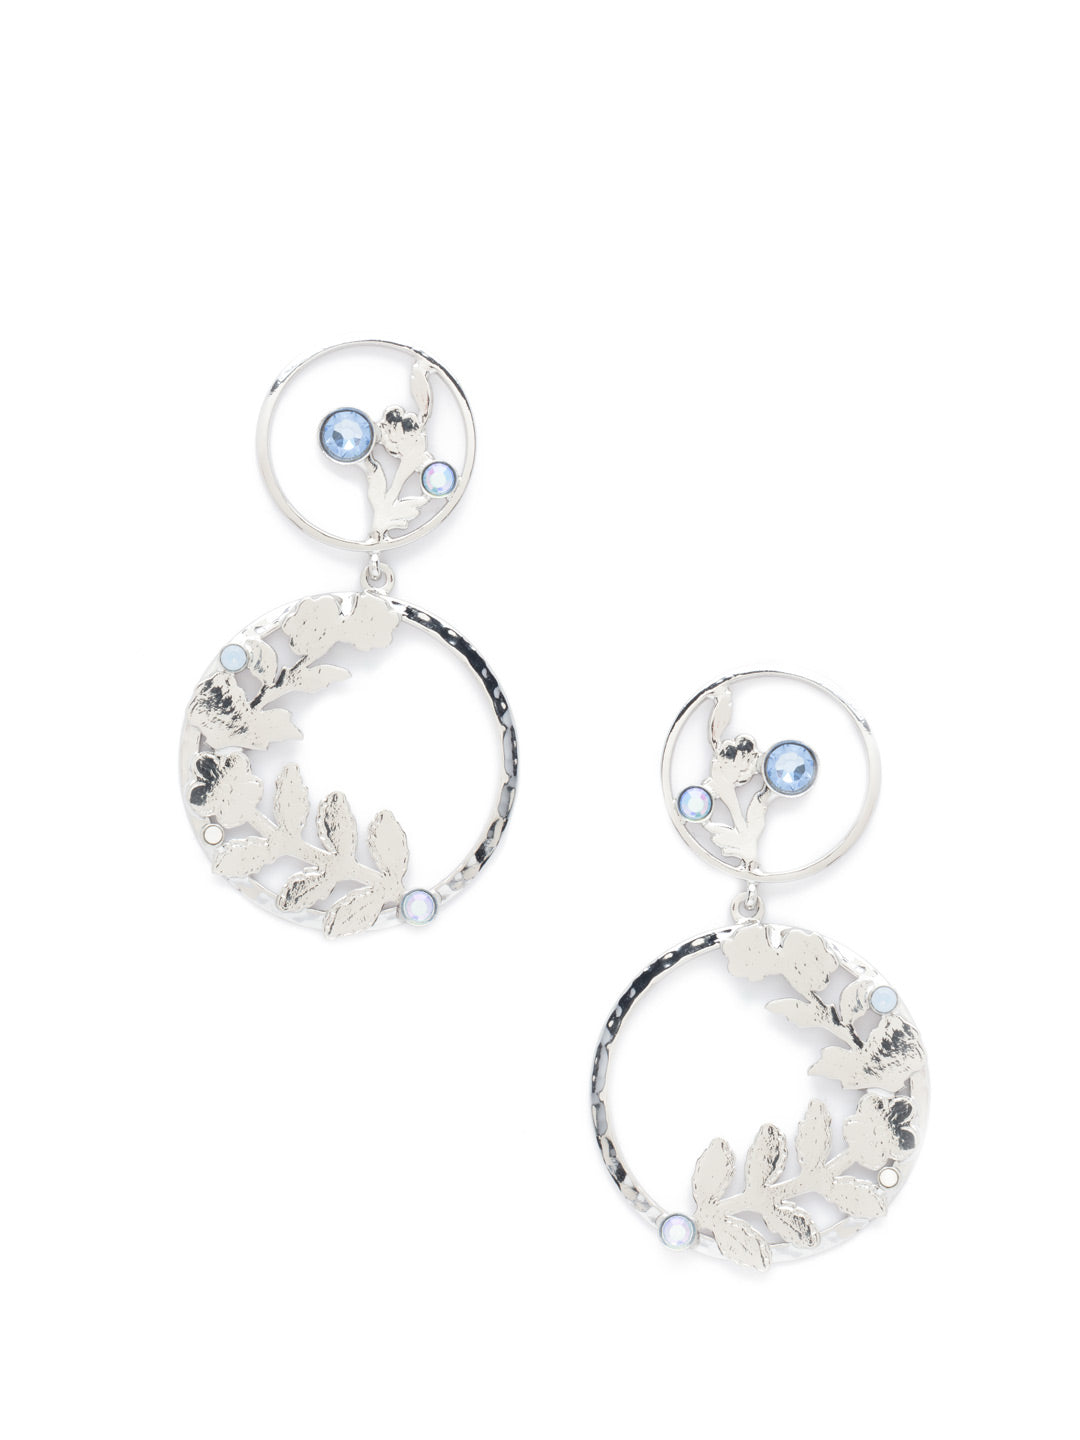 Ziva Dangle Earrings - EEV560PDWNB - <p>Our Ziva Dangle Earrings offer a duality of hard and soft. Hammered metalwork forms leafy artwork dotted with just a hint of sparkling crystals. From Sorrelli's Windsor Blue collection in our Palladium finish.</p>